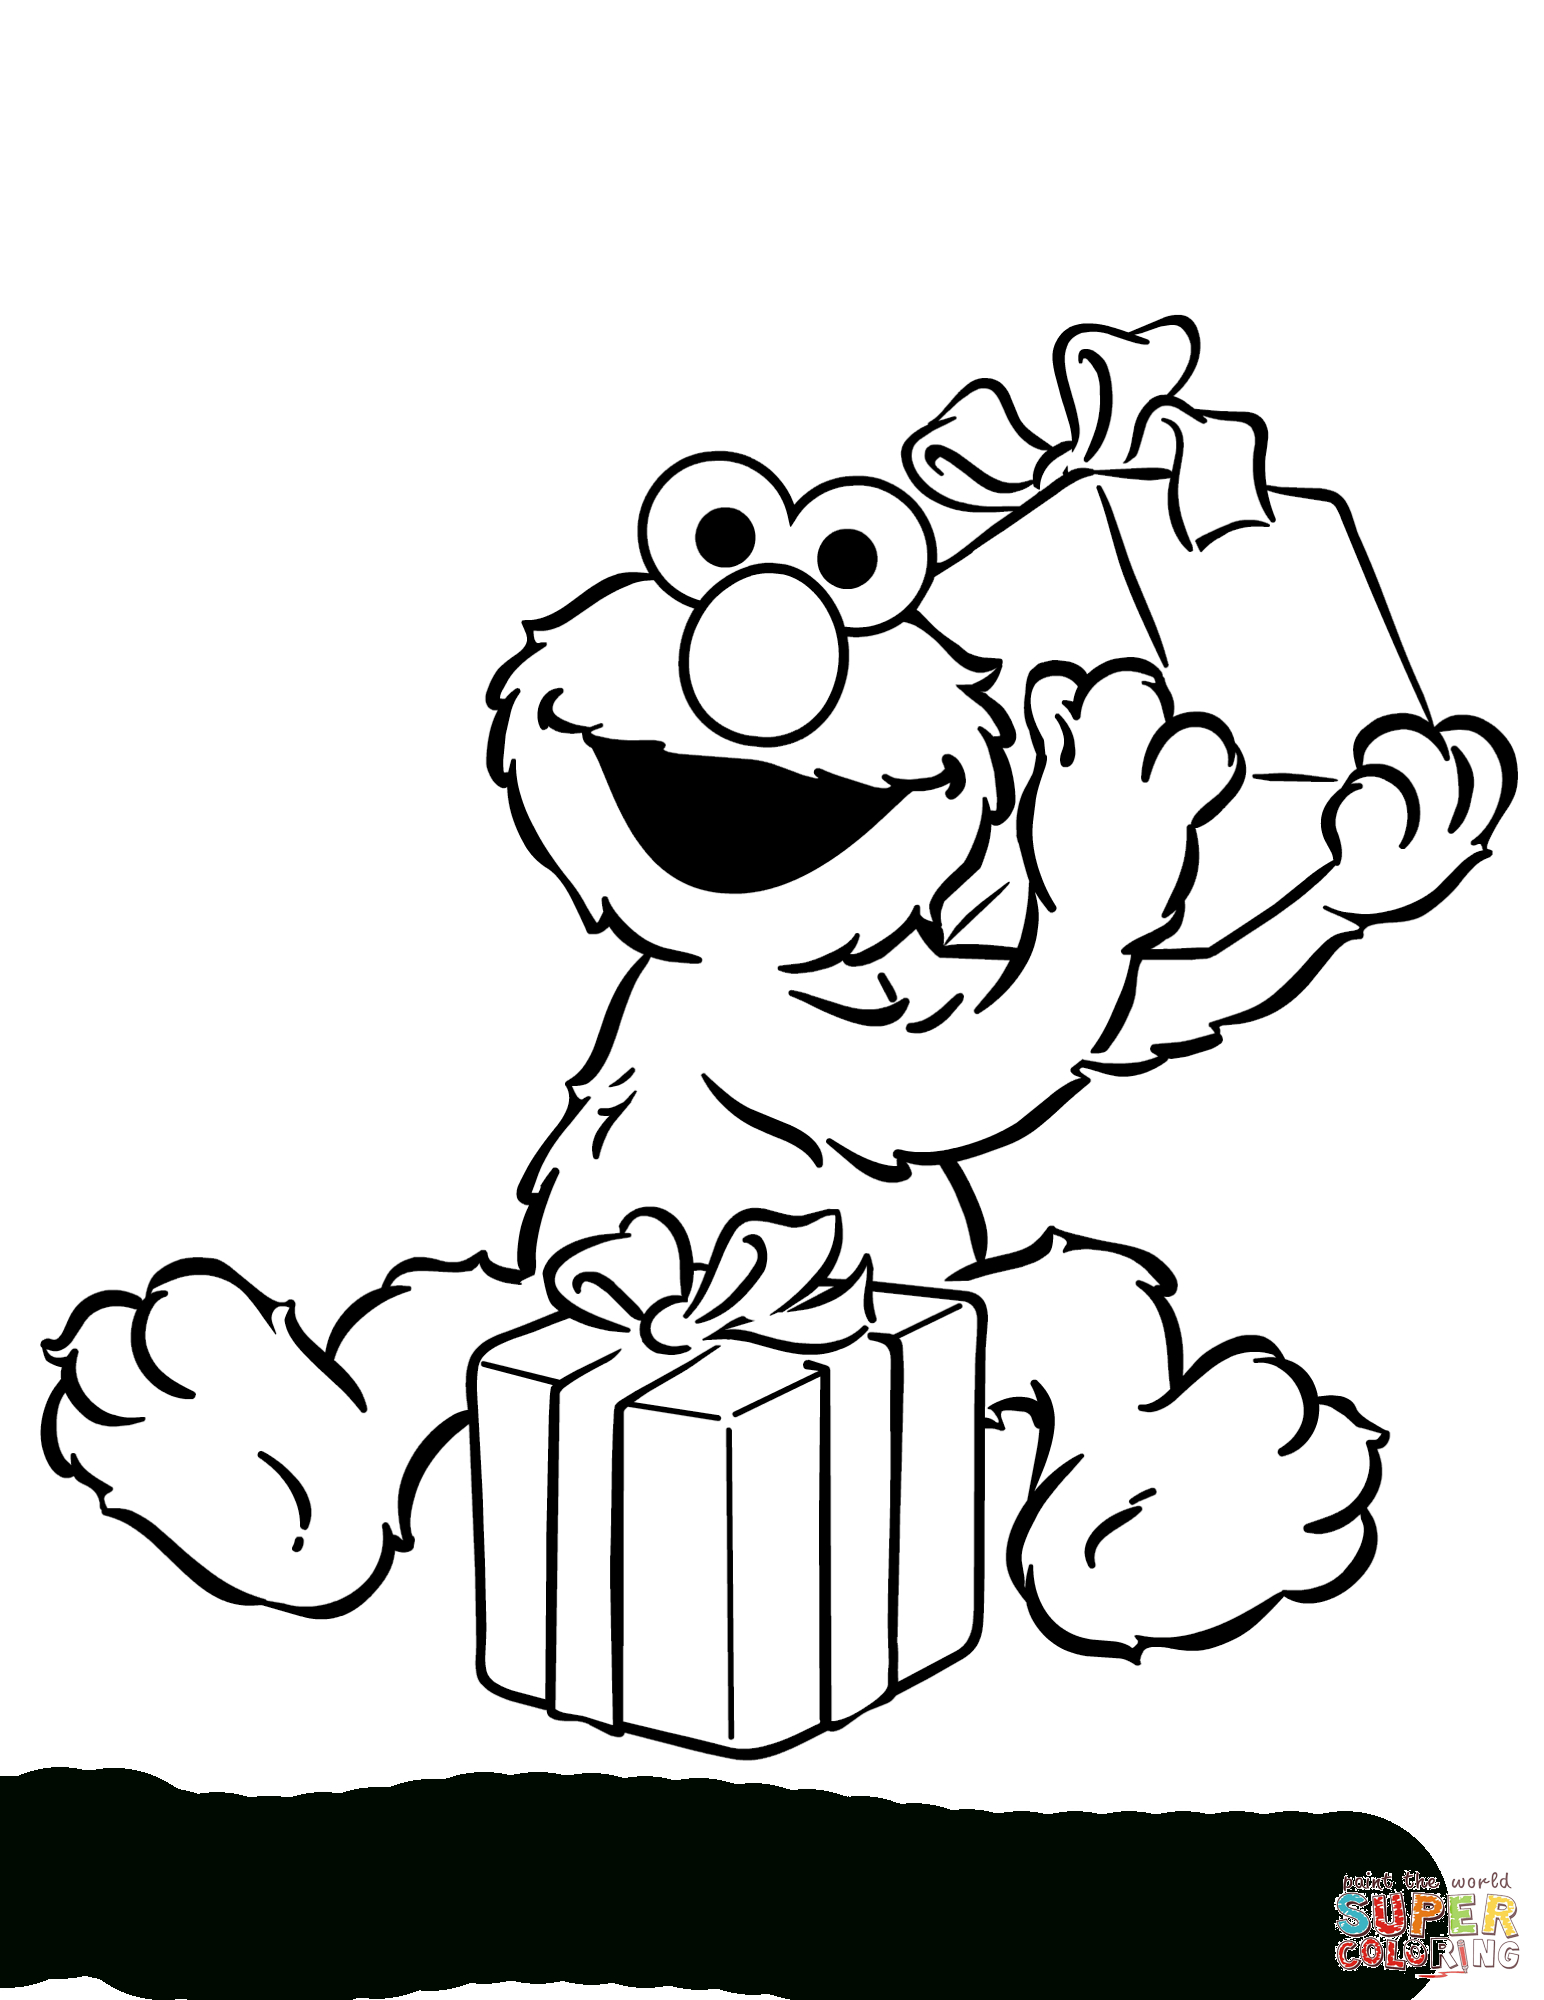 Pindavie W On Baby Nursery Kindergarten Coloring Pages Elmo Elmo Color Pages Free Printable